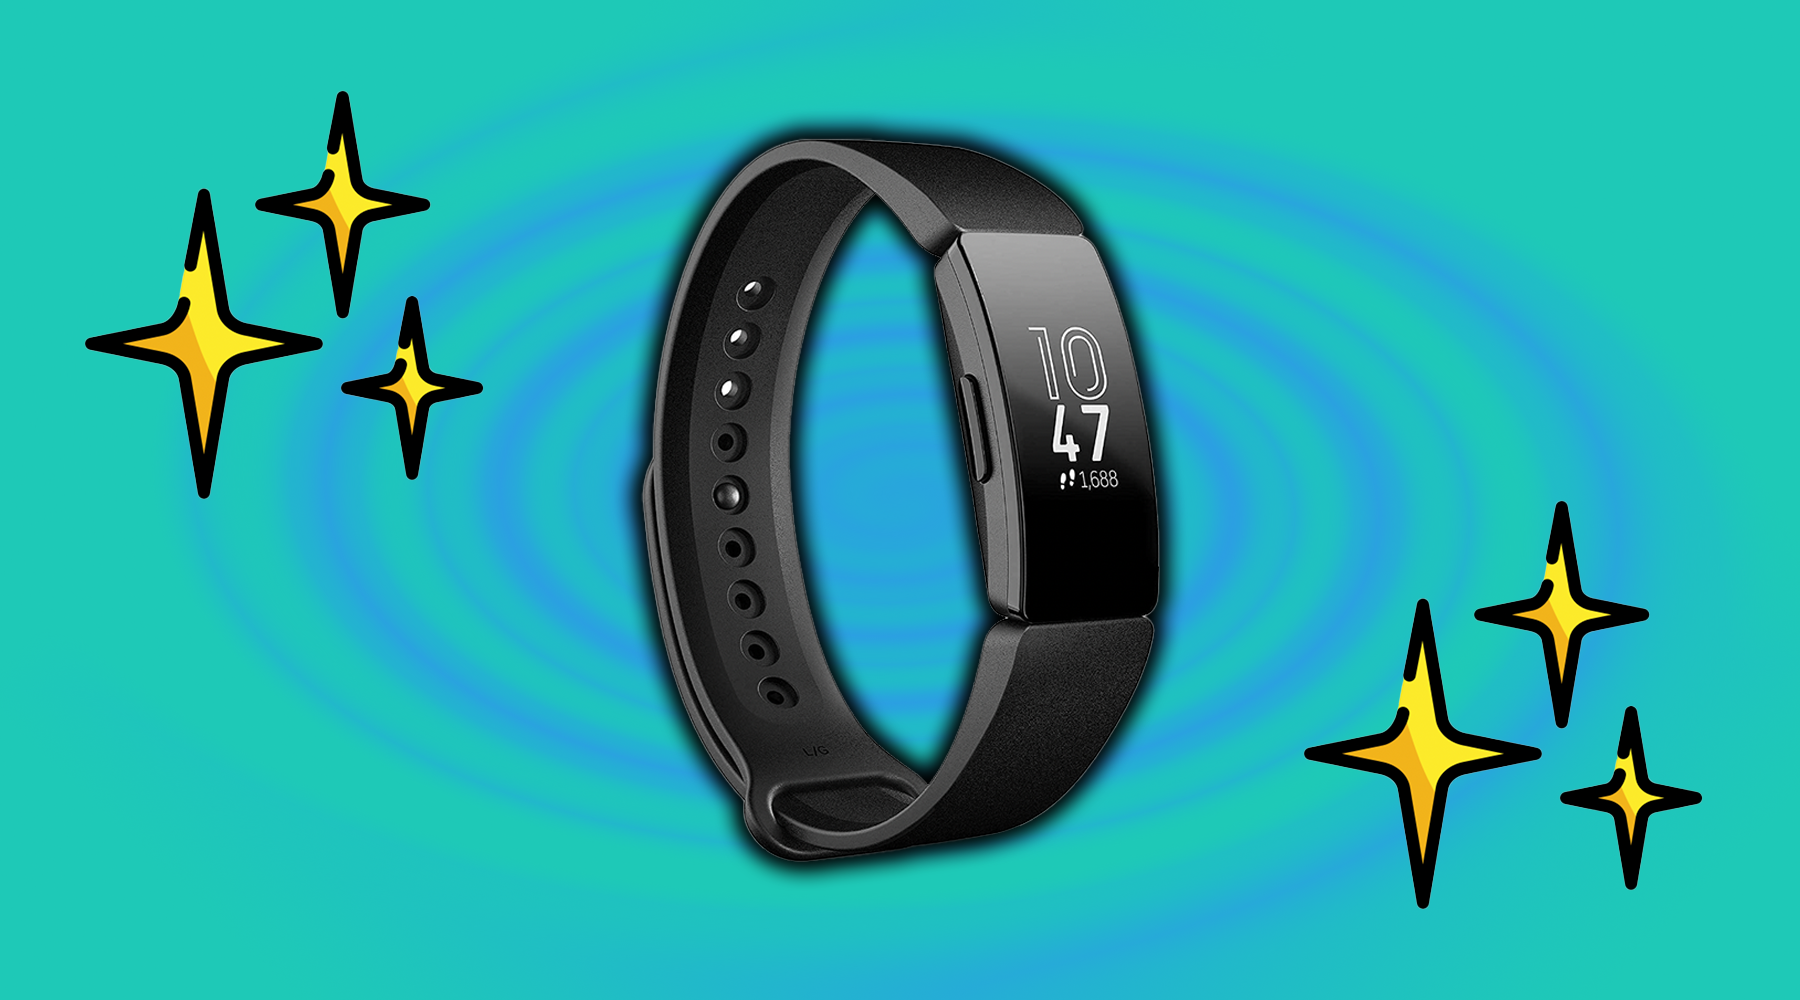 Review: The Fitbit the Fitness Tracker Under $100